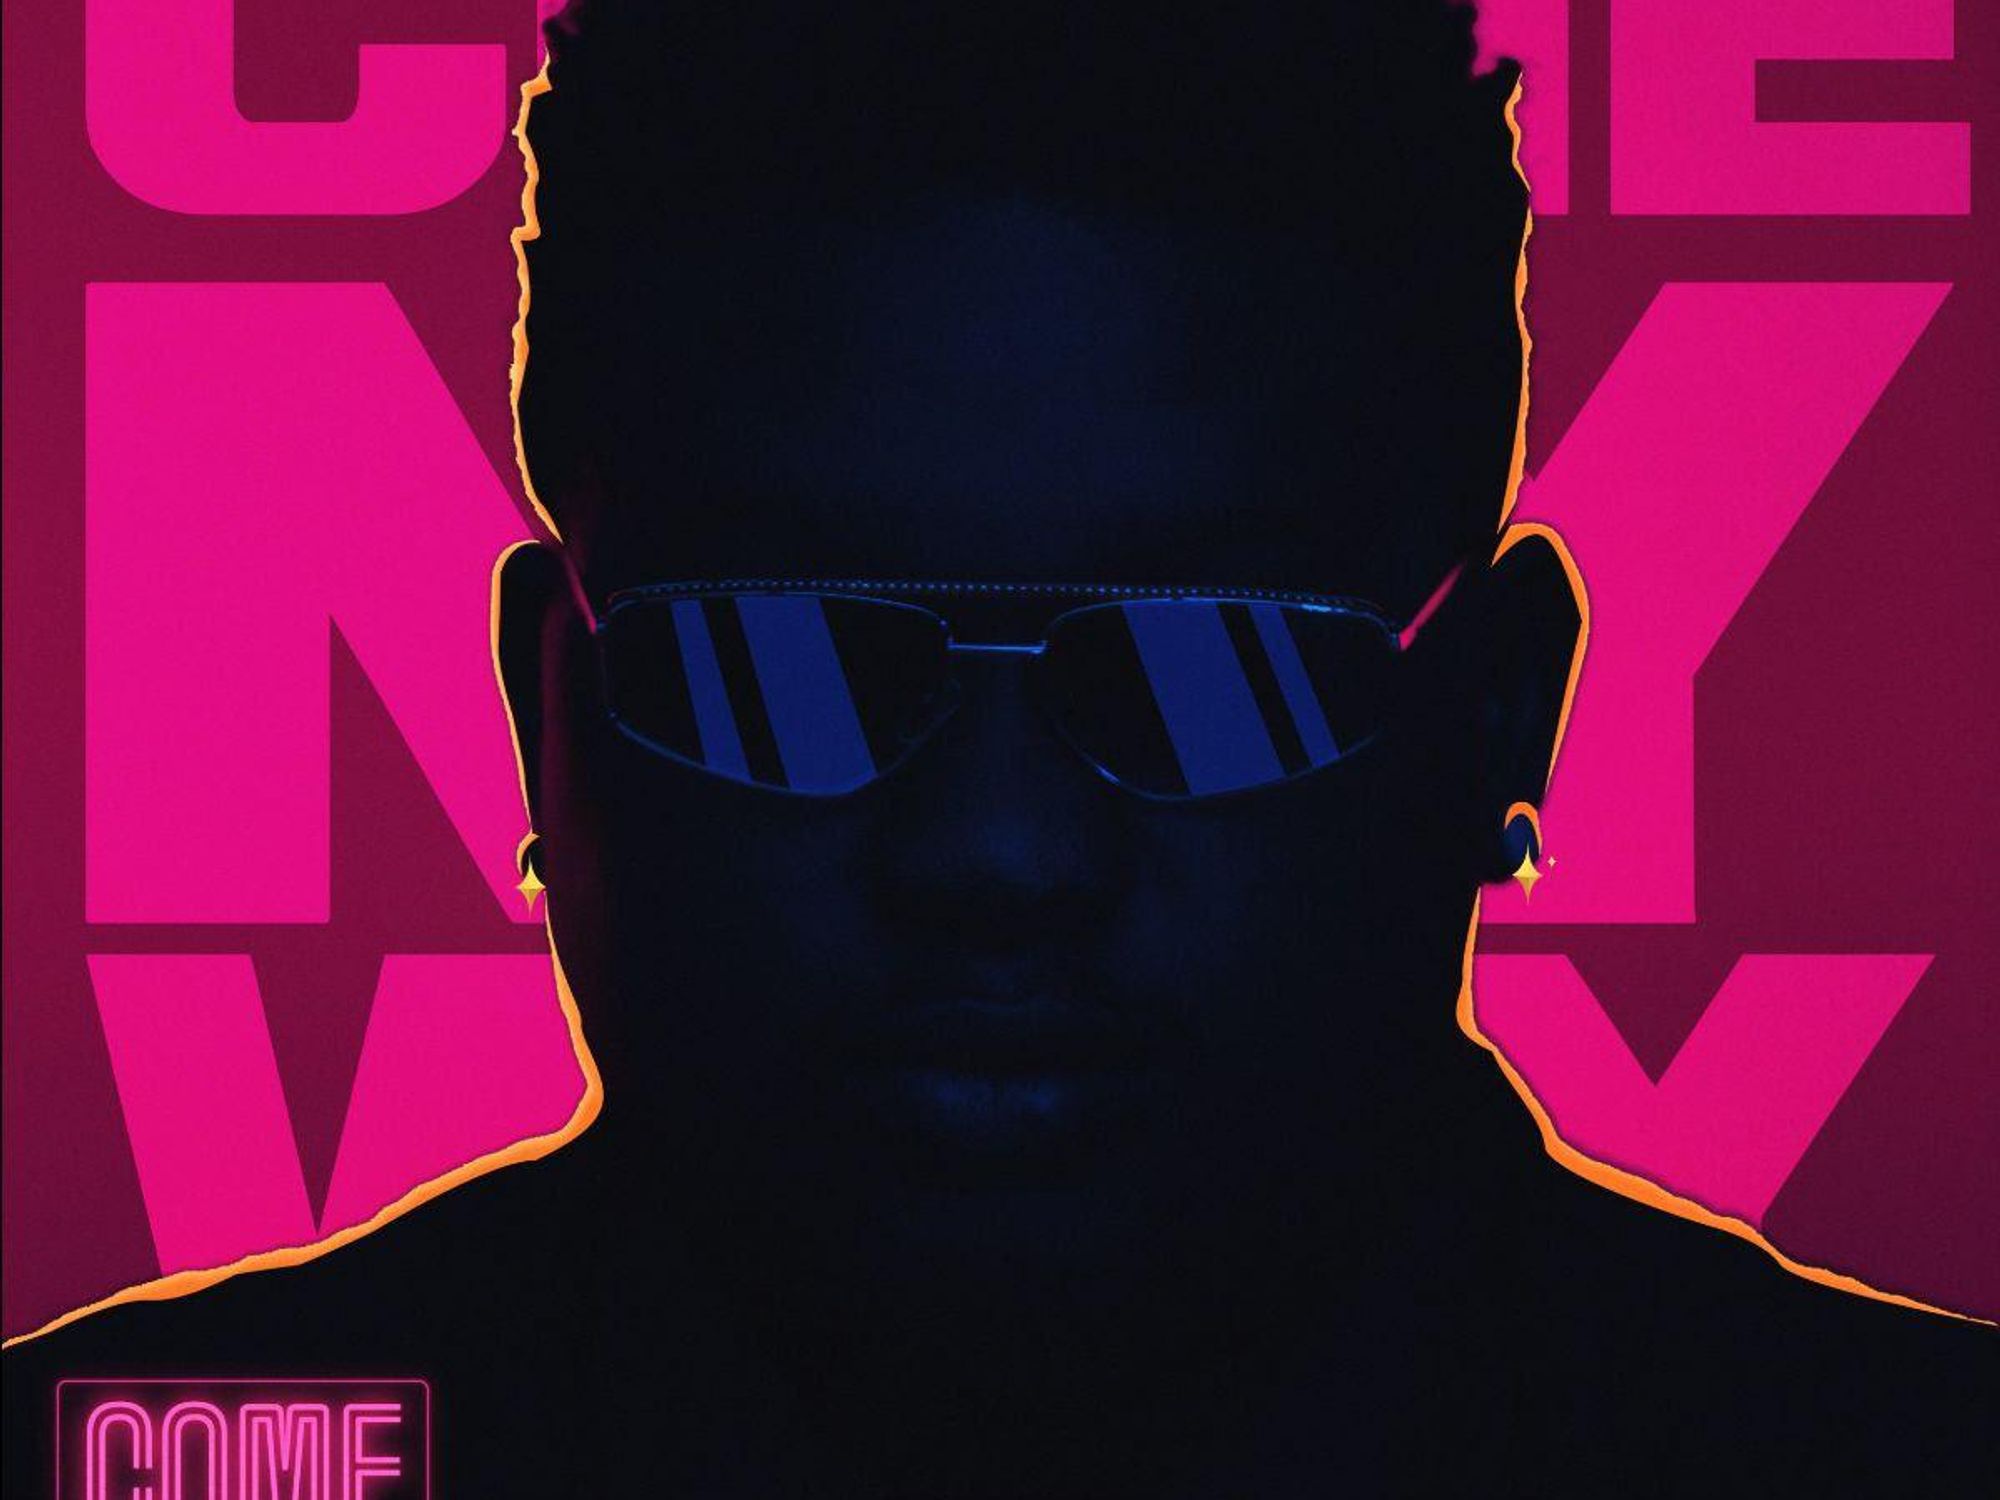 Wande Coal Calls In His Blessings In New Single 'Come My Way'